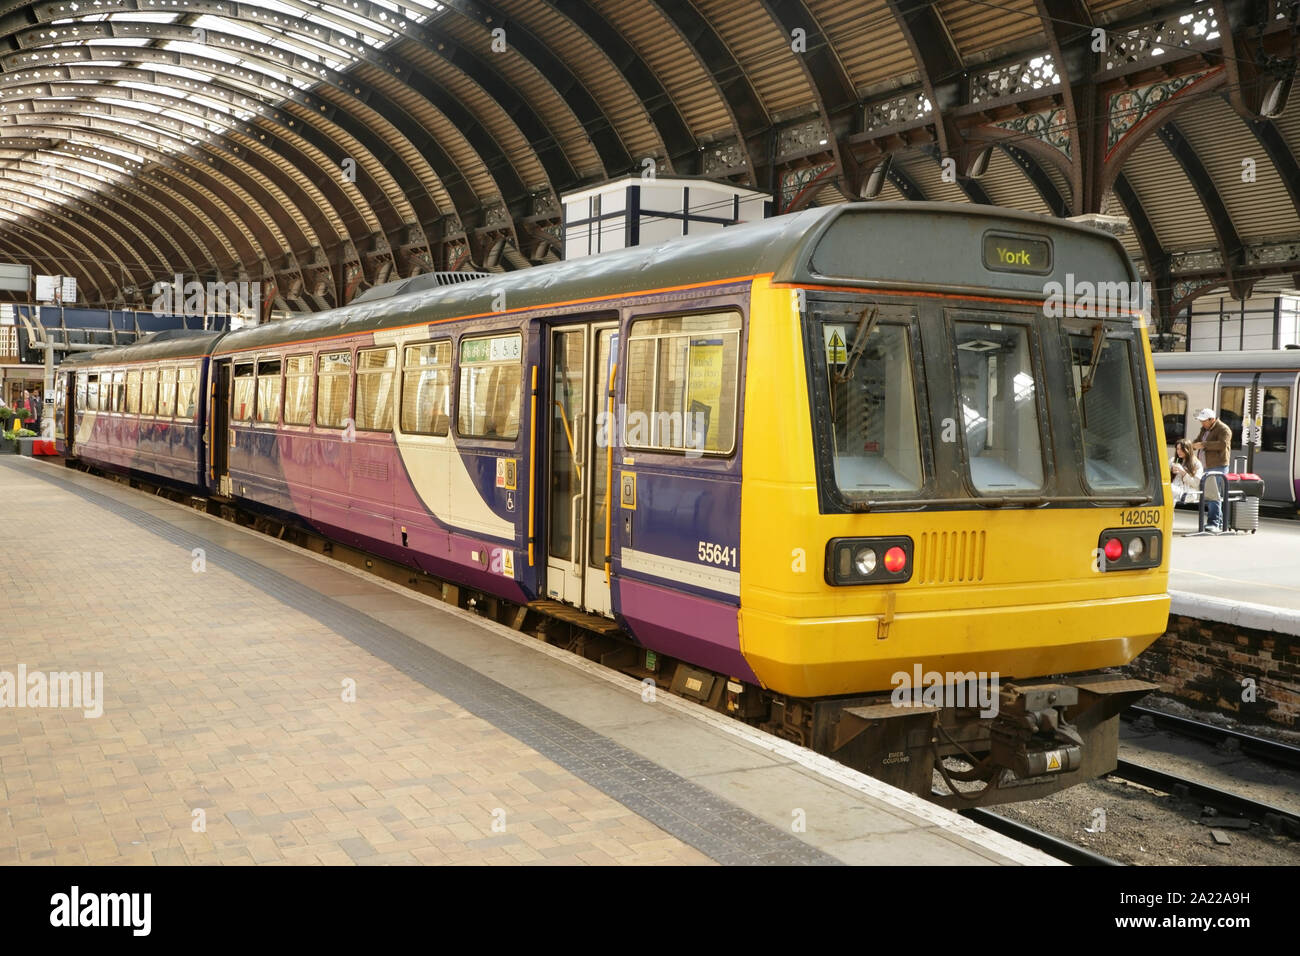 Northern rail class 142 Pacer diesel multiple unit no. 142050 at York station, UK. Stock Photo